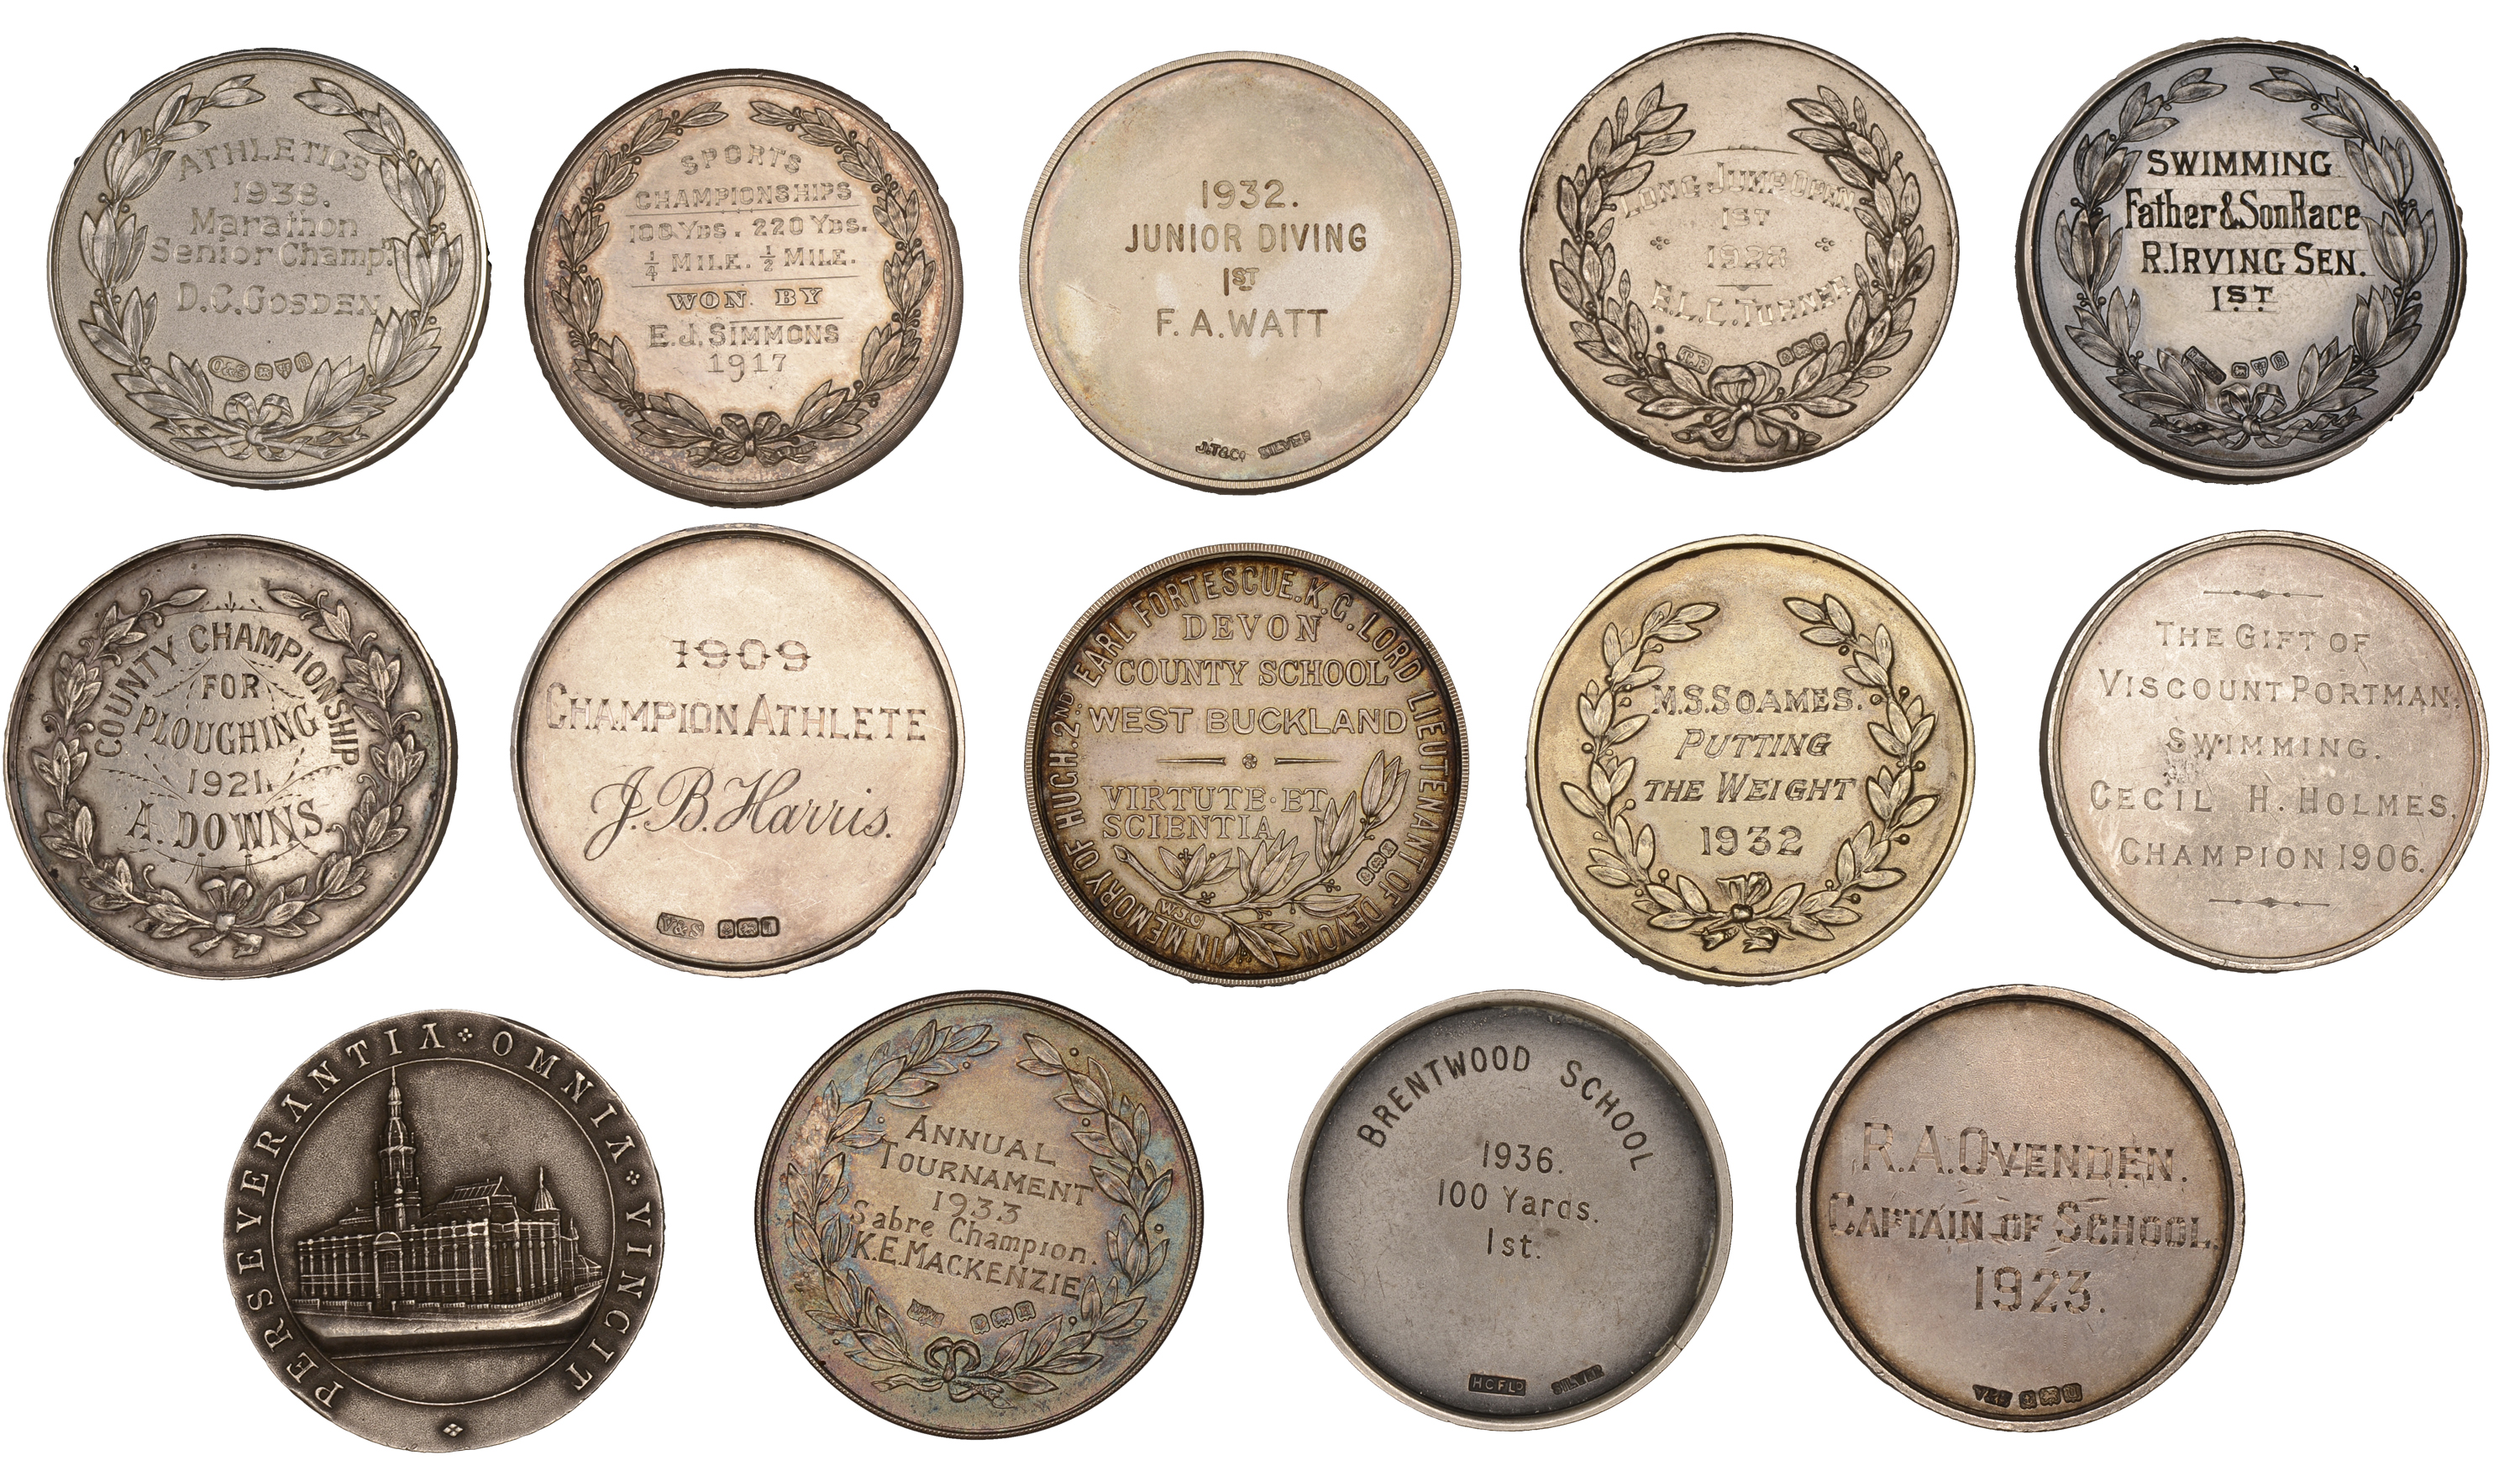 Miscellaneous, Educational award medals in silver (14), all 20th century, from Bradford, Bre... - Image 2 of 2